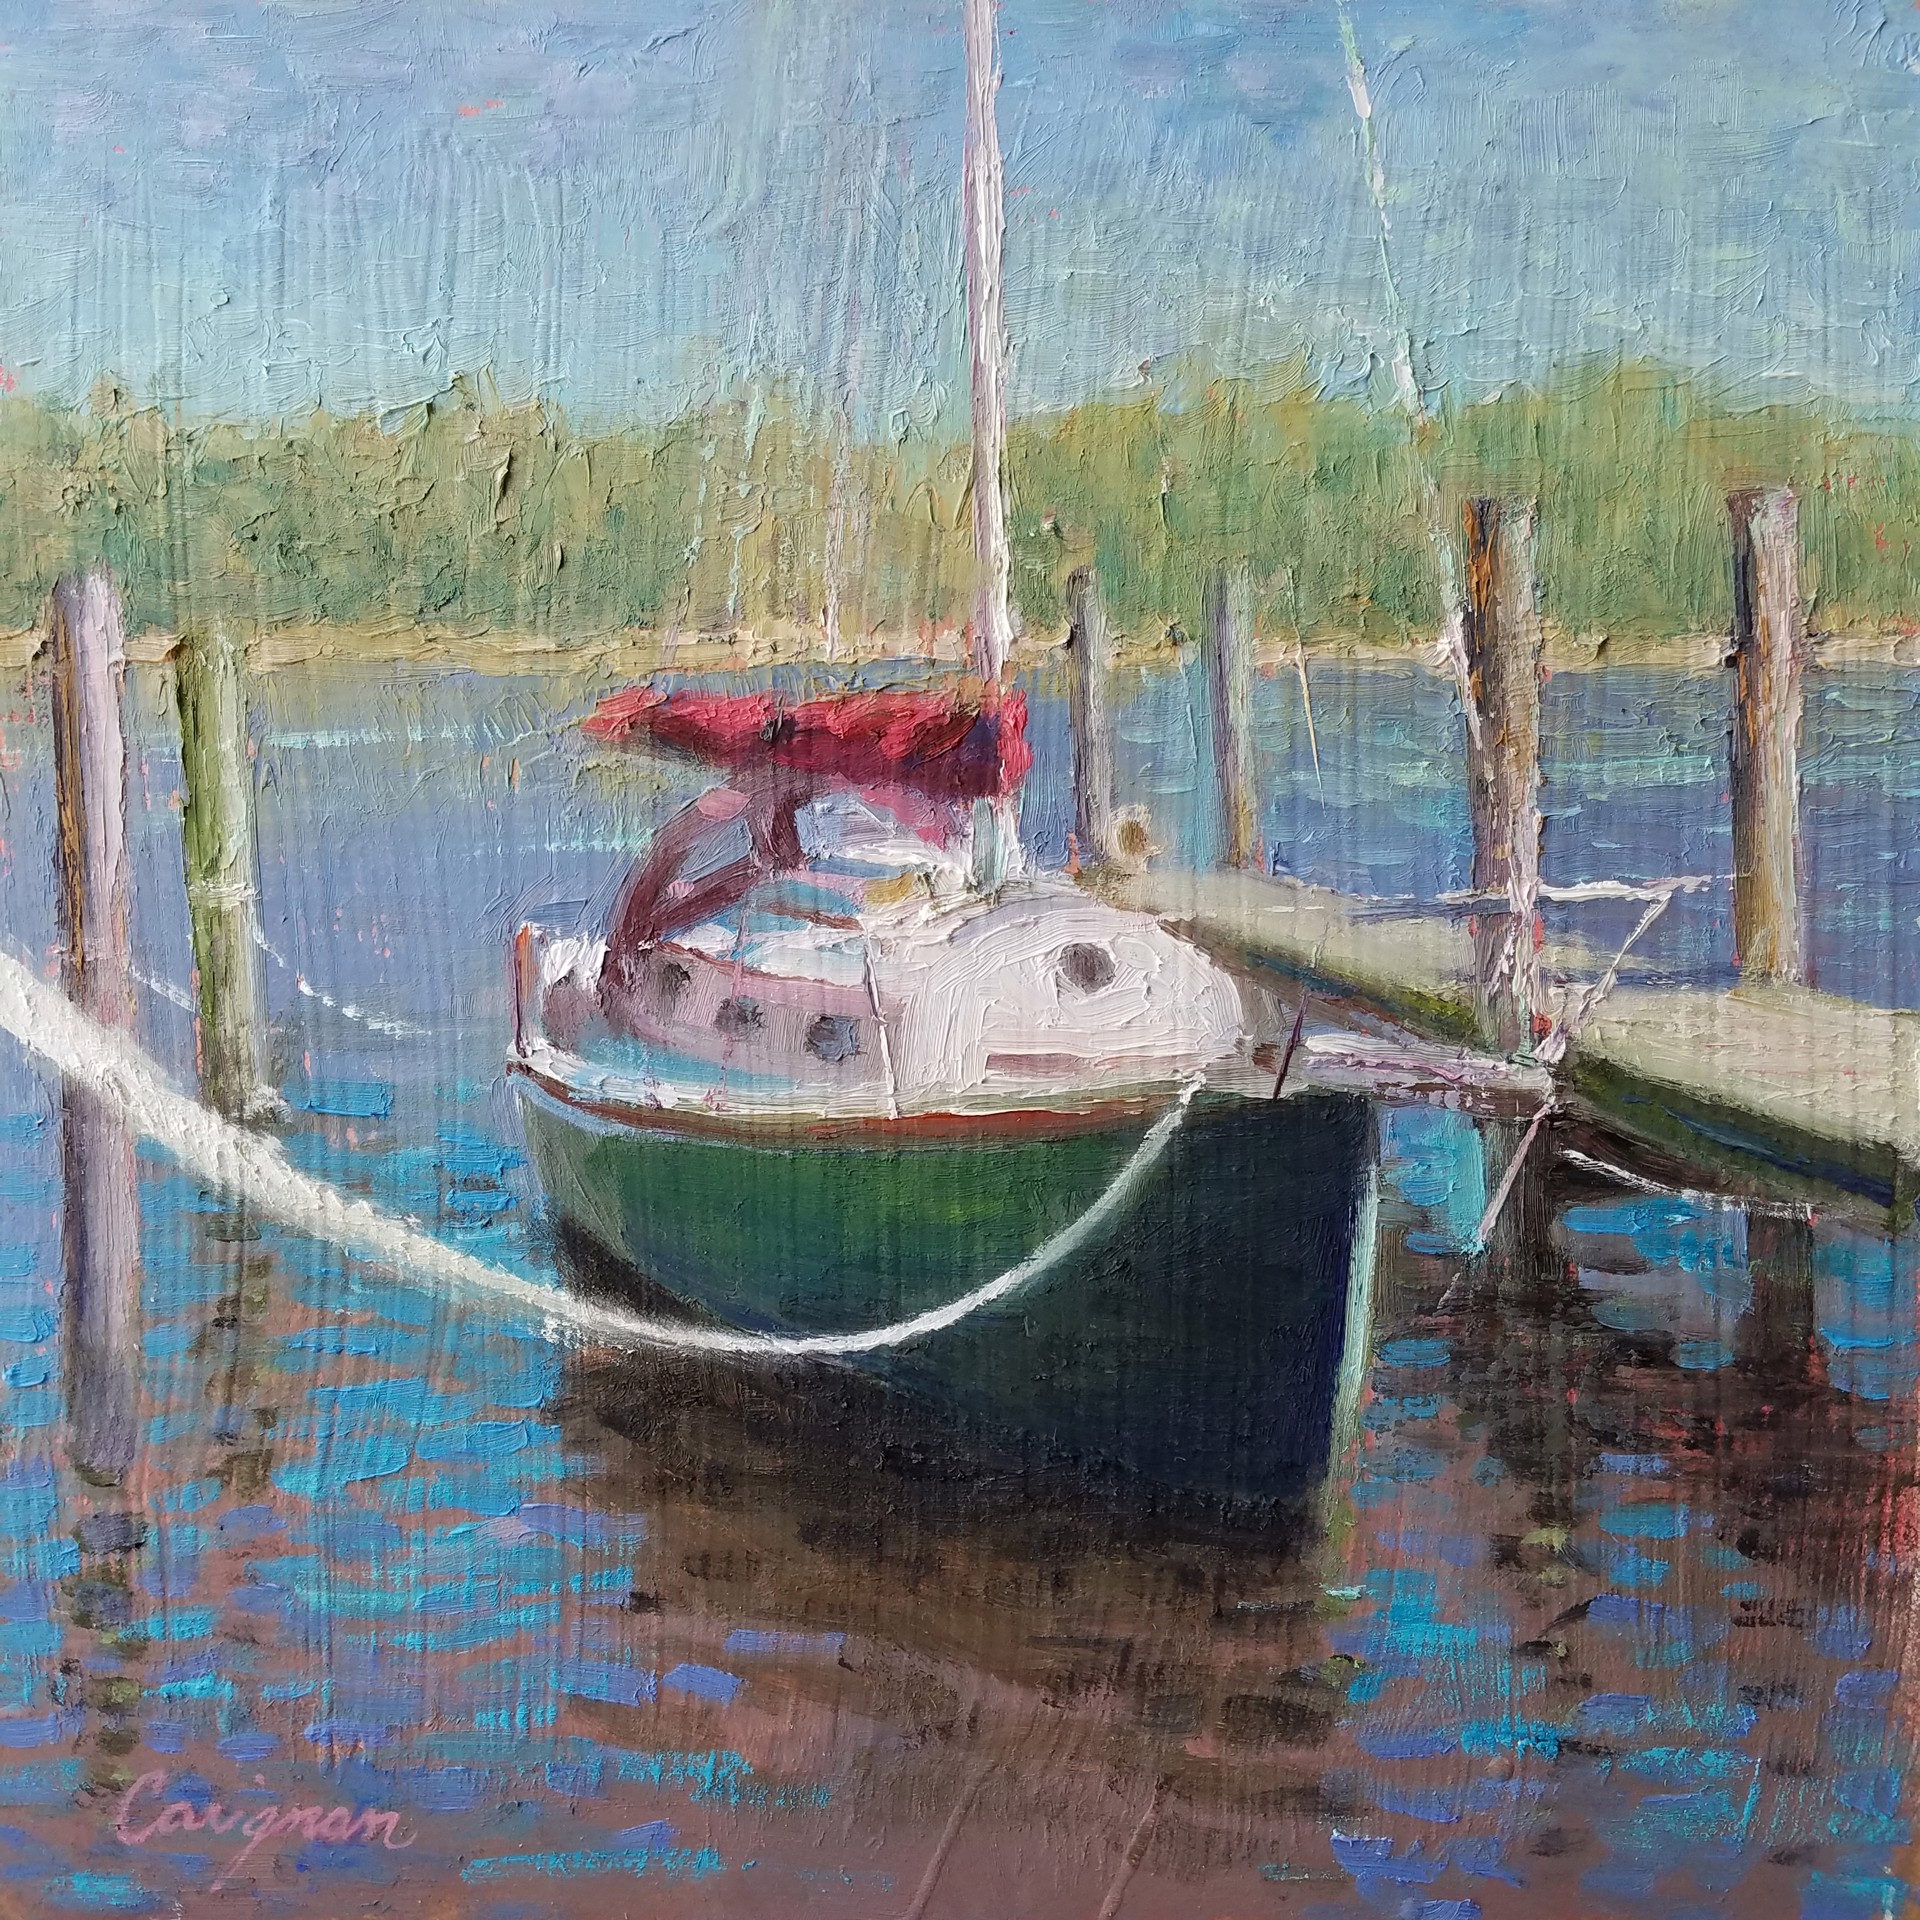 The Little Green Boat by Todd Carignan